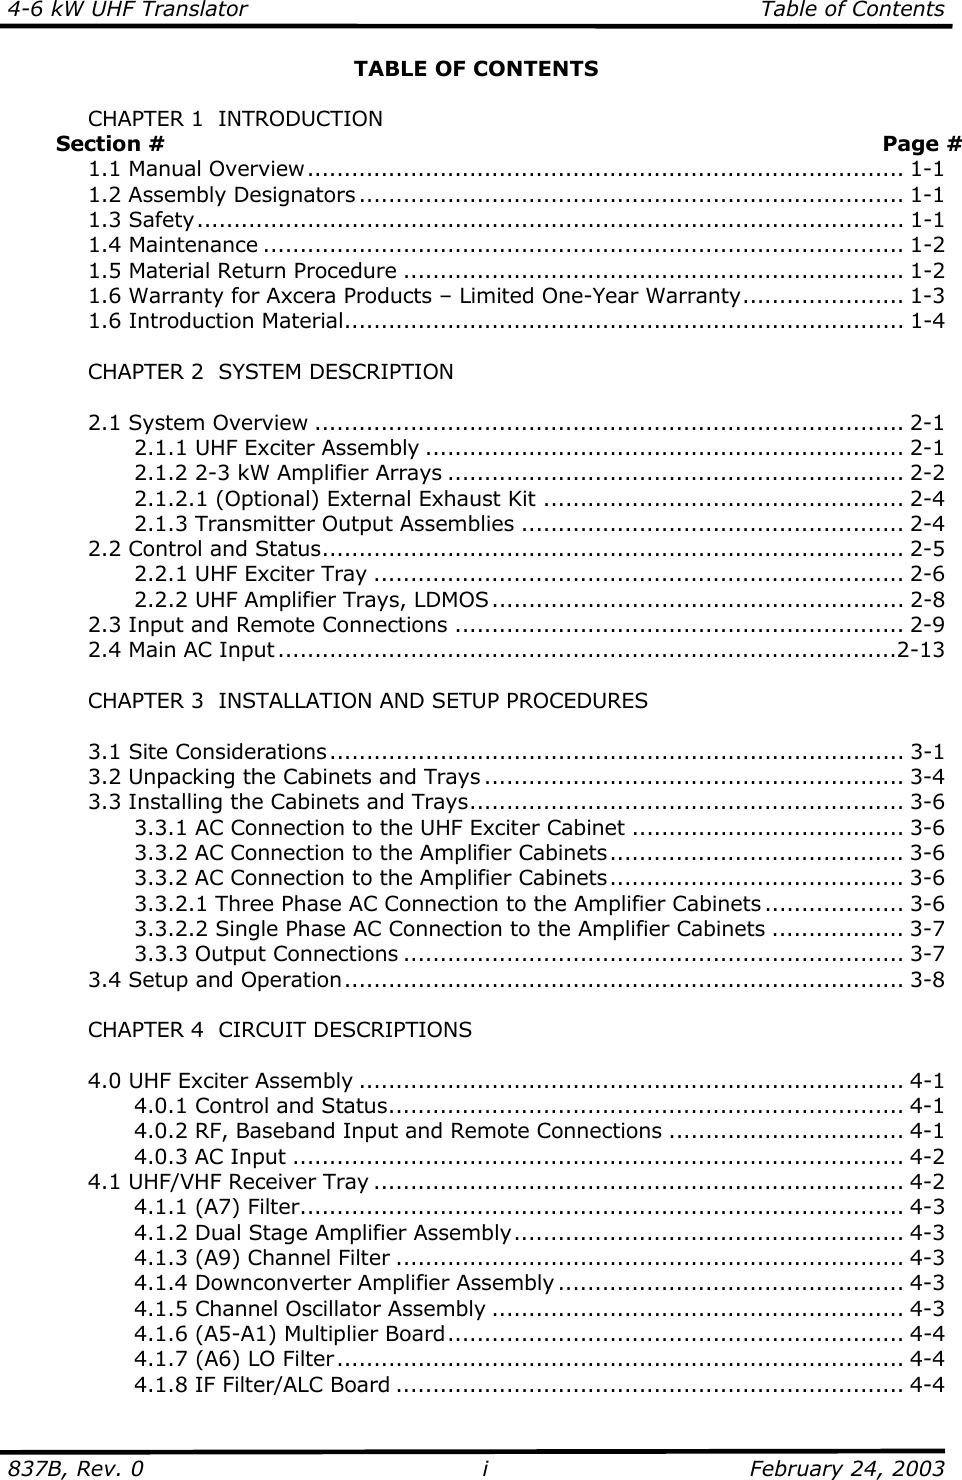 4-6 kW UHF Translator  Table of Contents  837B, Rev. 0 i  February 24, 2003 TABLE OF CONTENTS    CHAPTER 1  INTRODUCTION        Section #    Page #  1.1 Manual Overview................................................................................. 1-1   1.2 Assembly Designators .......................................................................... 1-1  1.3 Safety................................................................................................ 1-1  1.4 Maintenance ....................................................................................... 1-2   1.5 Material Return Procedure .................................................................... 1-2   1.6 Warranty for Axcera Products – Limited One-Year Warranty...................... 1-3   1.6 Introduction Material............................................................................ 1-4    CHAPTER 2  SYSTEM DESCRIPTION   2.1 System Overview ................................................................................ 2-1     2.1.1 UHF Exciter Assembly ................................................................. 2-1     2.1.2 2-3 kW Amplifier Arrays .............................................................. 2-2     2.1.2.1 (Optional) External Exhaust Kit ................................................. 2-4     2.1.3 Transmitter Output Assemblies .................................................... 2-4  2.2 Control and Status............................................................................... 2-5     2.2.1 UHF Exciter Tray ........................................................................ 2-6     2.2.2 UHF Amplifier Trays, LDMOS........................................................ 2-8   2.3 Input and Remote Connections ............................................................. 2-9   2.4 Main AC Input ....................................................................................2-13    CHAPTER 3  INSTALLATION AND SETUP PROCEDURES     3.1 Site Considerations.............................................................................. 3-1   3.2 Unpacking the Cabinets and Trays ......................................................... 3-4   3.3 Installing the Cabinets and Trays........................................................... 3-6     3.3.1 AC Connection to the UHF Exciter Cabinet ..................................... 3-6     3.3.2 AC Connection to the Amplifier Cabinets........................................ 3-6     3.3.2 AC Connection to the Amplifier Cabinets........................................ 3-6     3.3.2.1 Three Phase AC Connection to the Amplifier Cabinets ................... 3-6     3.3.2.2 Single Phase AC Connection to the Amplifier Cabinets .................. 3-7   3.3.3 Output Connections .................................................................... 3-7  3.4 Setup and Operation............................................................................ 3-8    CHAPTER 4  CIRCUIT DESCRIPTIONS    4.0 UHF Exciter Assembly .......................................................................... 4-1   4.0.1 Control and Status...................................................................... 4-1     4.0.2 RF, Baseband Input and Remote Connections ................................ 4-1   4.0.3 AC Input ................................................................................... 4-2   4.1 UHF/VHF Receiver Tray ........................................................................ 4-2   4.1.1 (A7) Filter.................................................................................. 4-3     4.1.2 Dual Stage Amplifier Assembly..................................................... 4-3   4.1.3 (A9) Channel Filter ..................................................................... 4-3   4.1.4 Downconverter Amplifier Assembly ............................................... 4-3     4.1.5 Channel Oscillator Assembly ........................................................ 4-3     4.1.6 (A5-A1) Multiplier Board.............................................................. 4-4     4.1.7 (A6) LO Filter............................................................................. 4-4     4.1.8 IF Filter/ALC Board ..................................................................... 4-4 